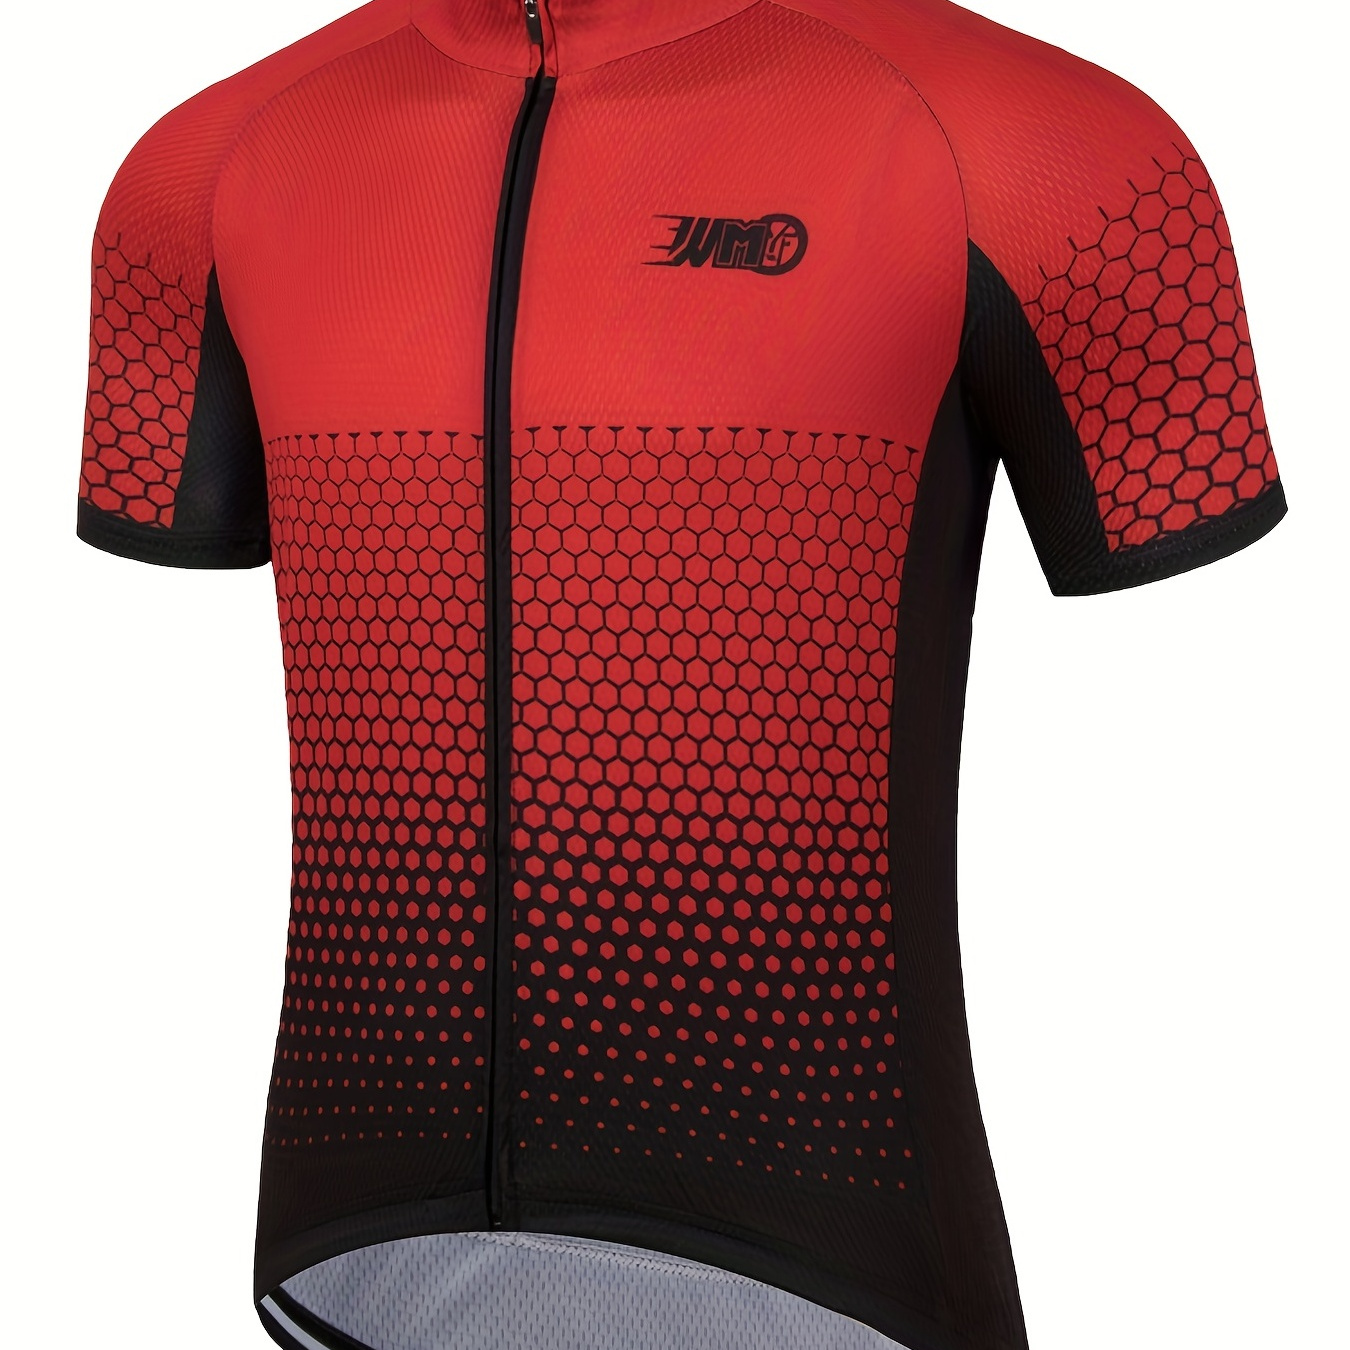 

Men's Cycling Jersey With Rear Pocket, Quick Dry Breathable Moisture Wicking Short Sleeve Mtb Shirt For Biking Riding Sports